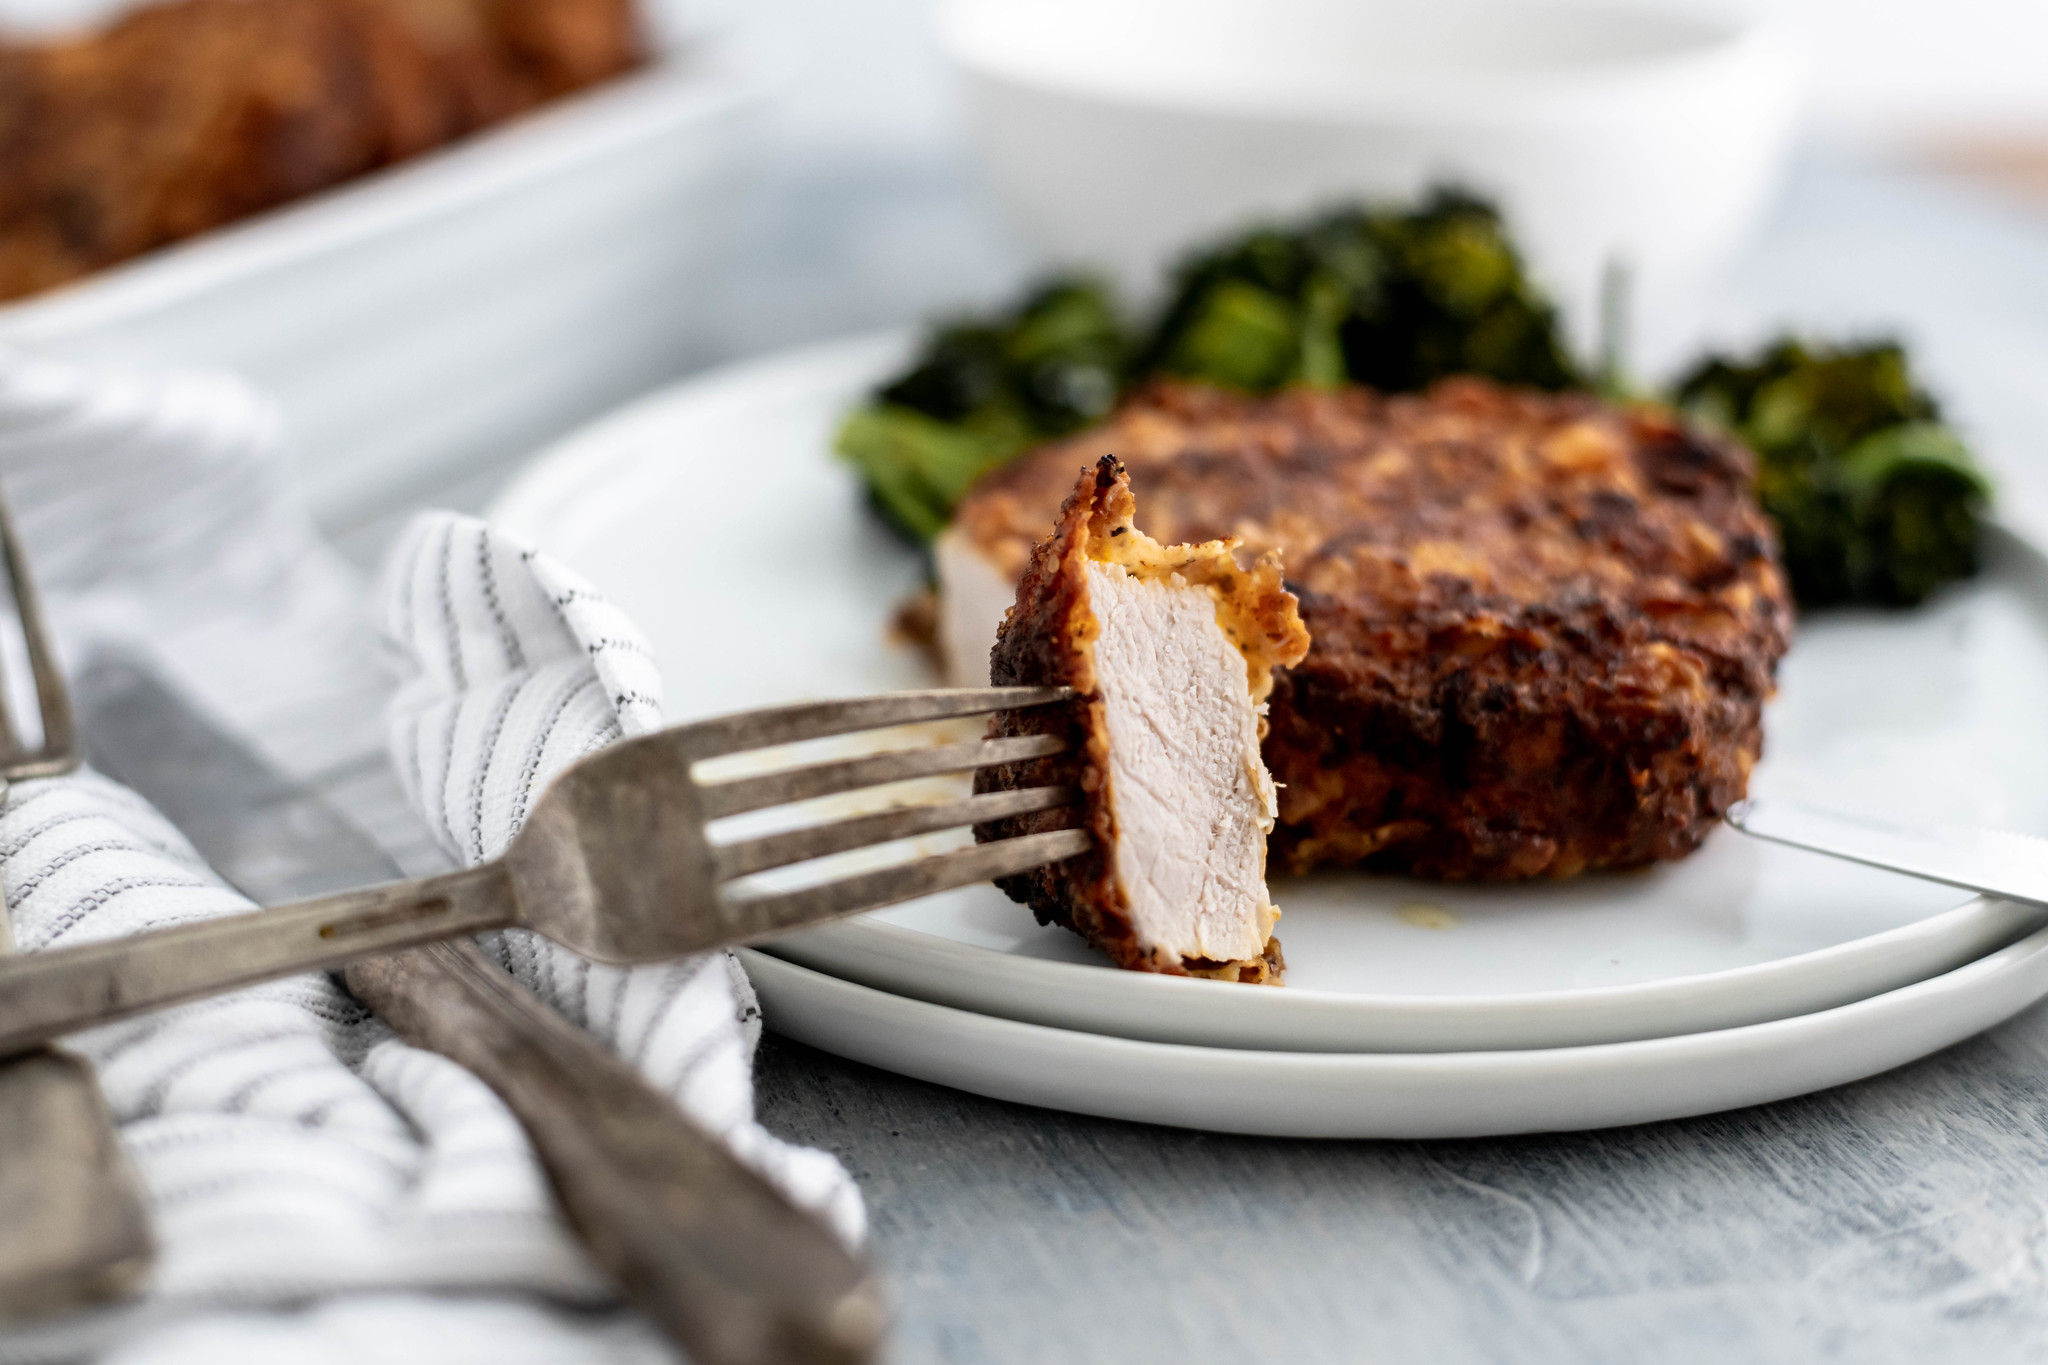 Bite cut out of a southern fried pork chop on a white round plate with roasted broccoli on the side.